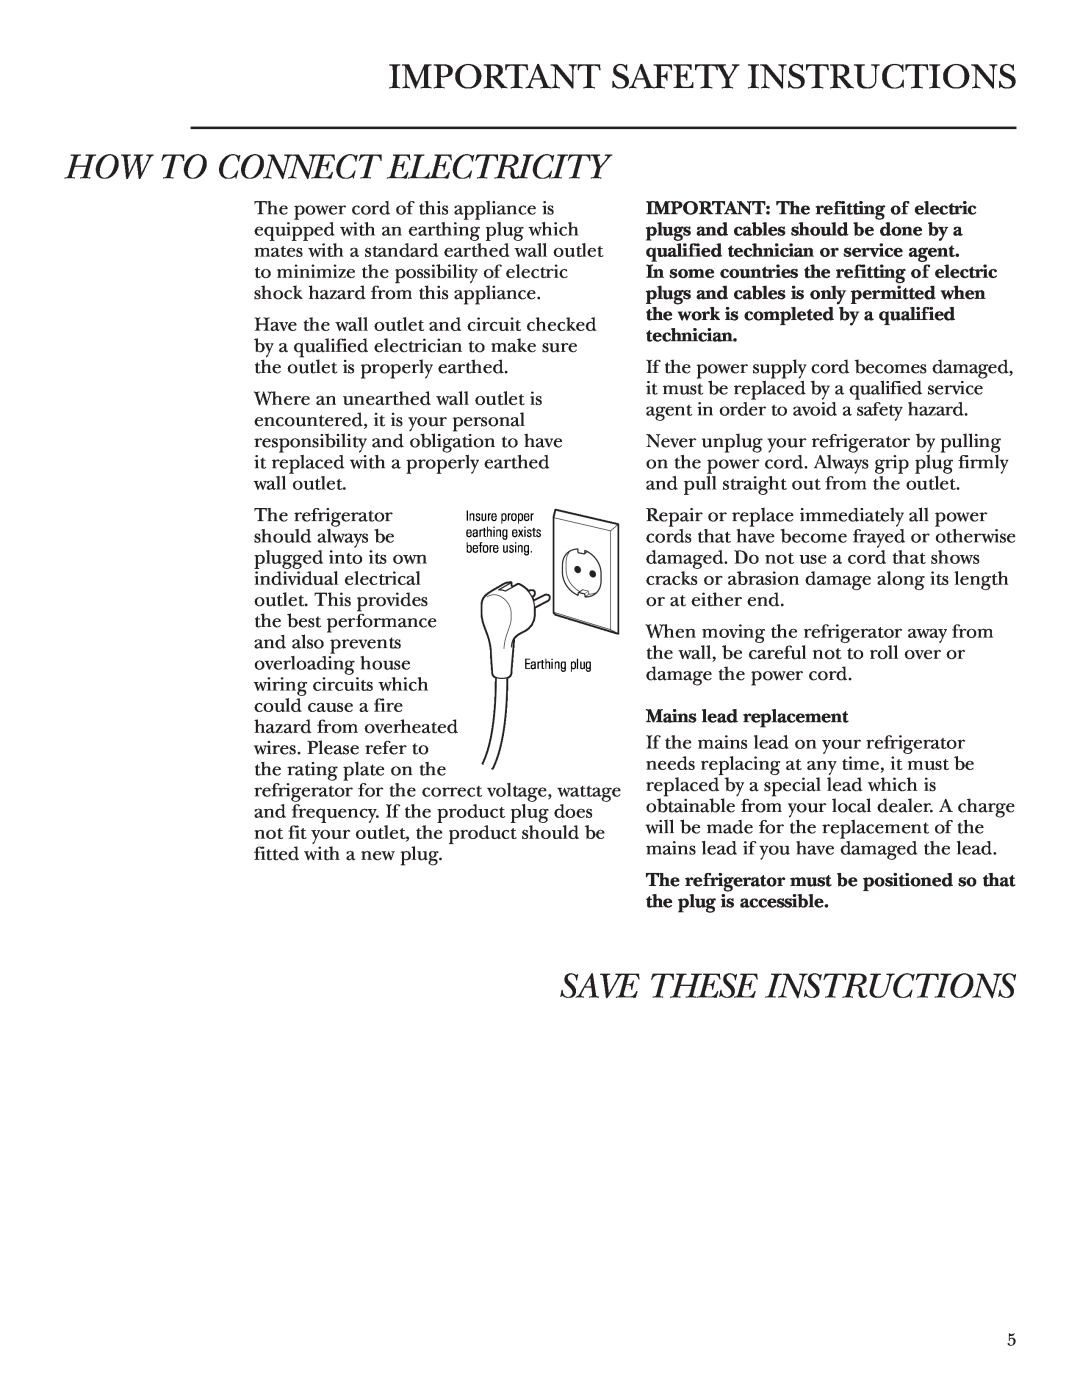 GE Monogram ZDWG240 owner manual How To Connect Electricity, Save These Instructions, Mains lead replacement 